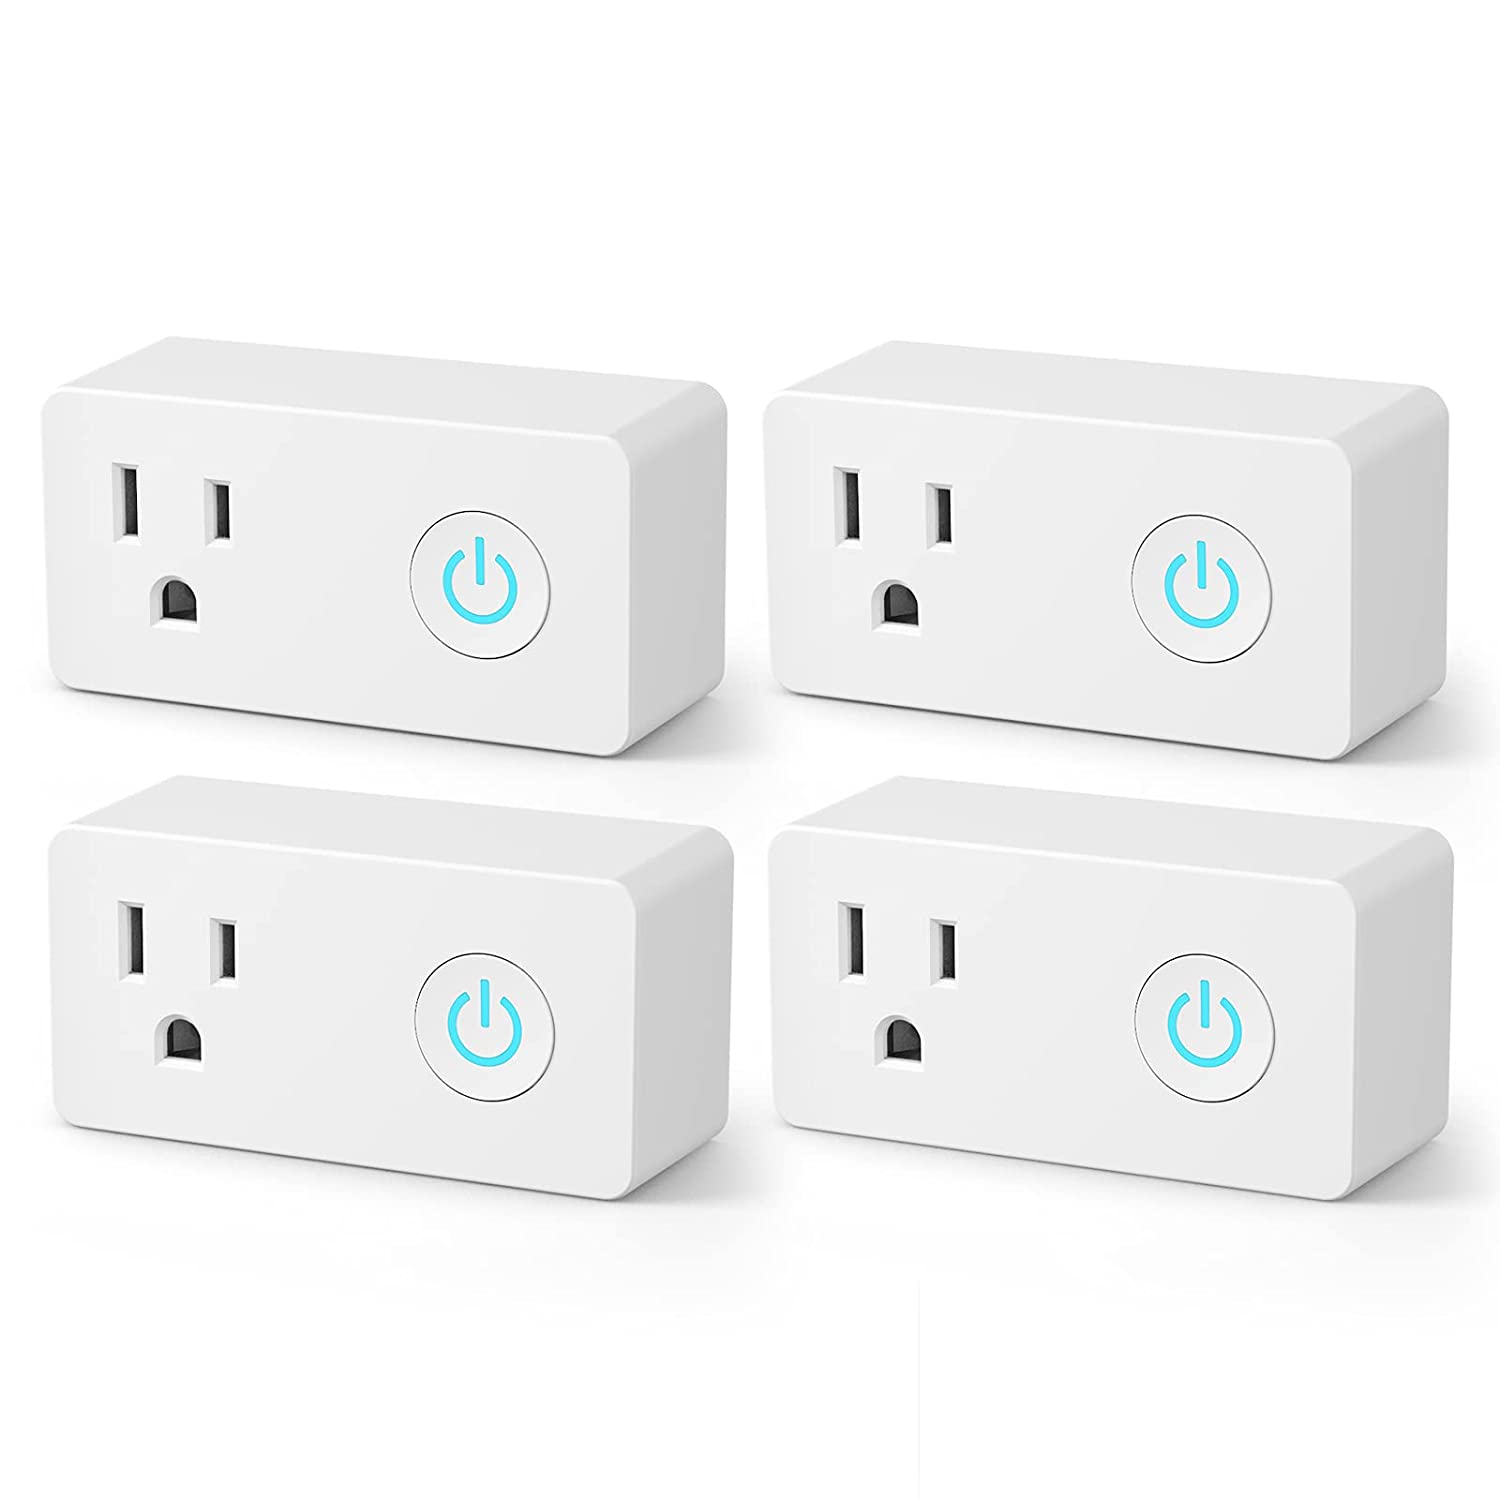 BN-LINK WiFi Heavy Task Smart Plug Outlet, No Hub Required with Timer Function, White, Compatible with Alexa and Google Assistant, 2.4 Ghz Network Only (4 Pack)